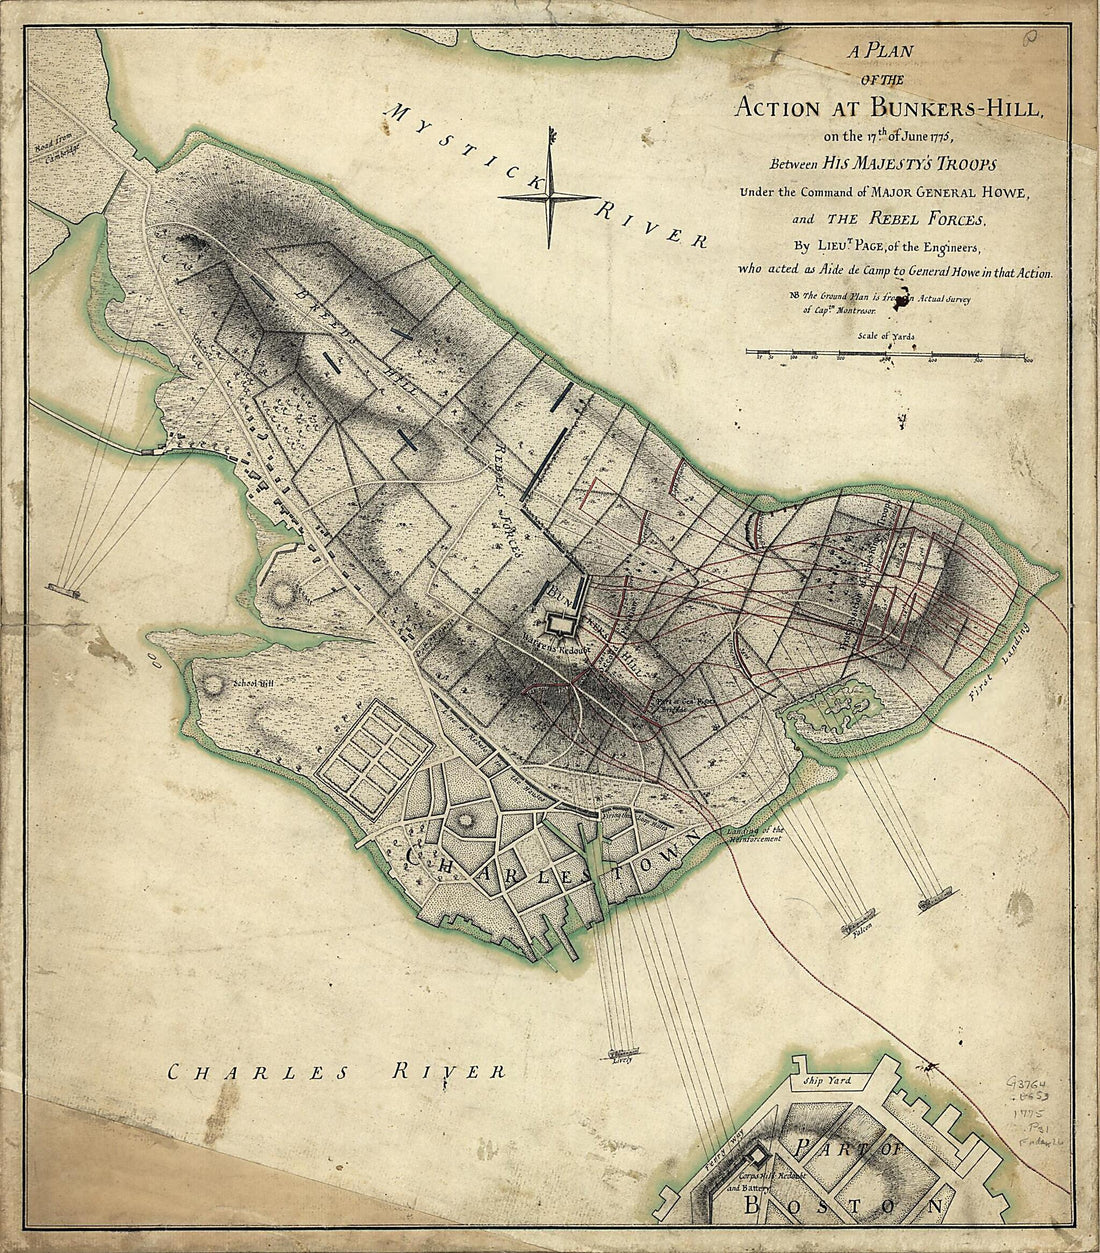 This old map of Hill, On the 17th. of June, from 1775, Between His Majesty&